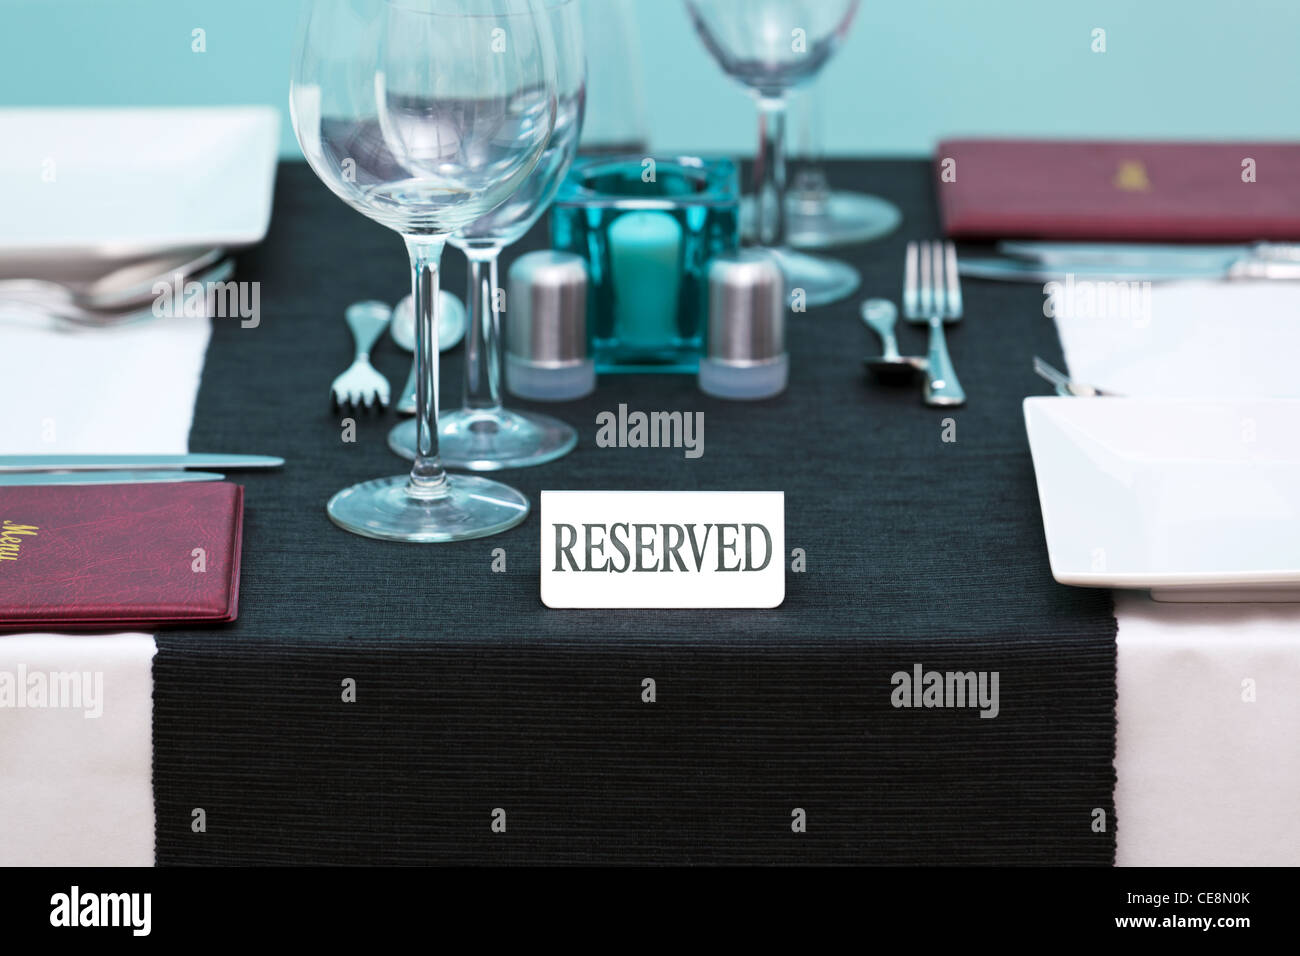 Photo of a Reserved sign on a restaurant table with menus on the side and place settings for two people. Stock Photo